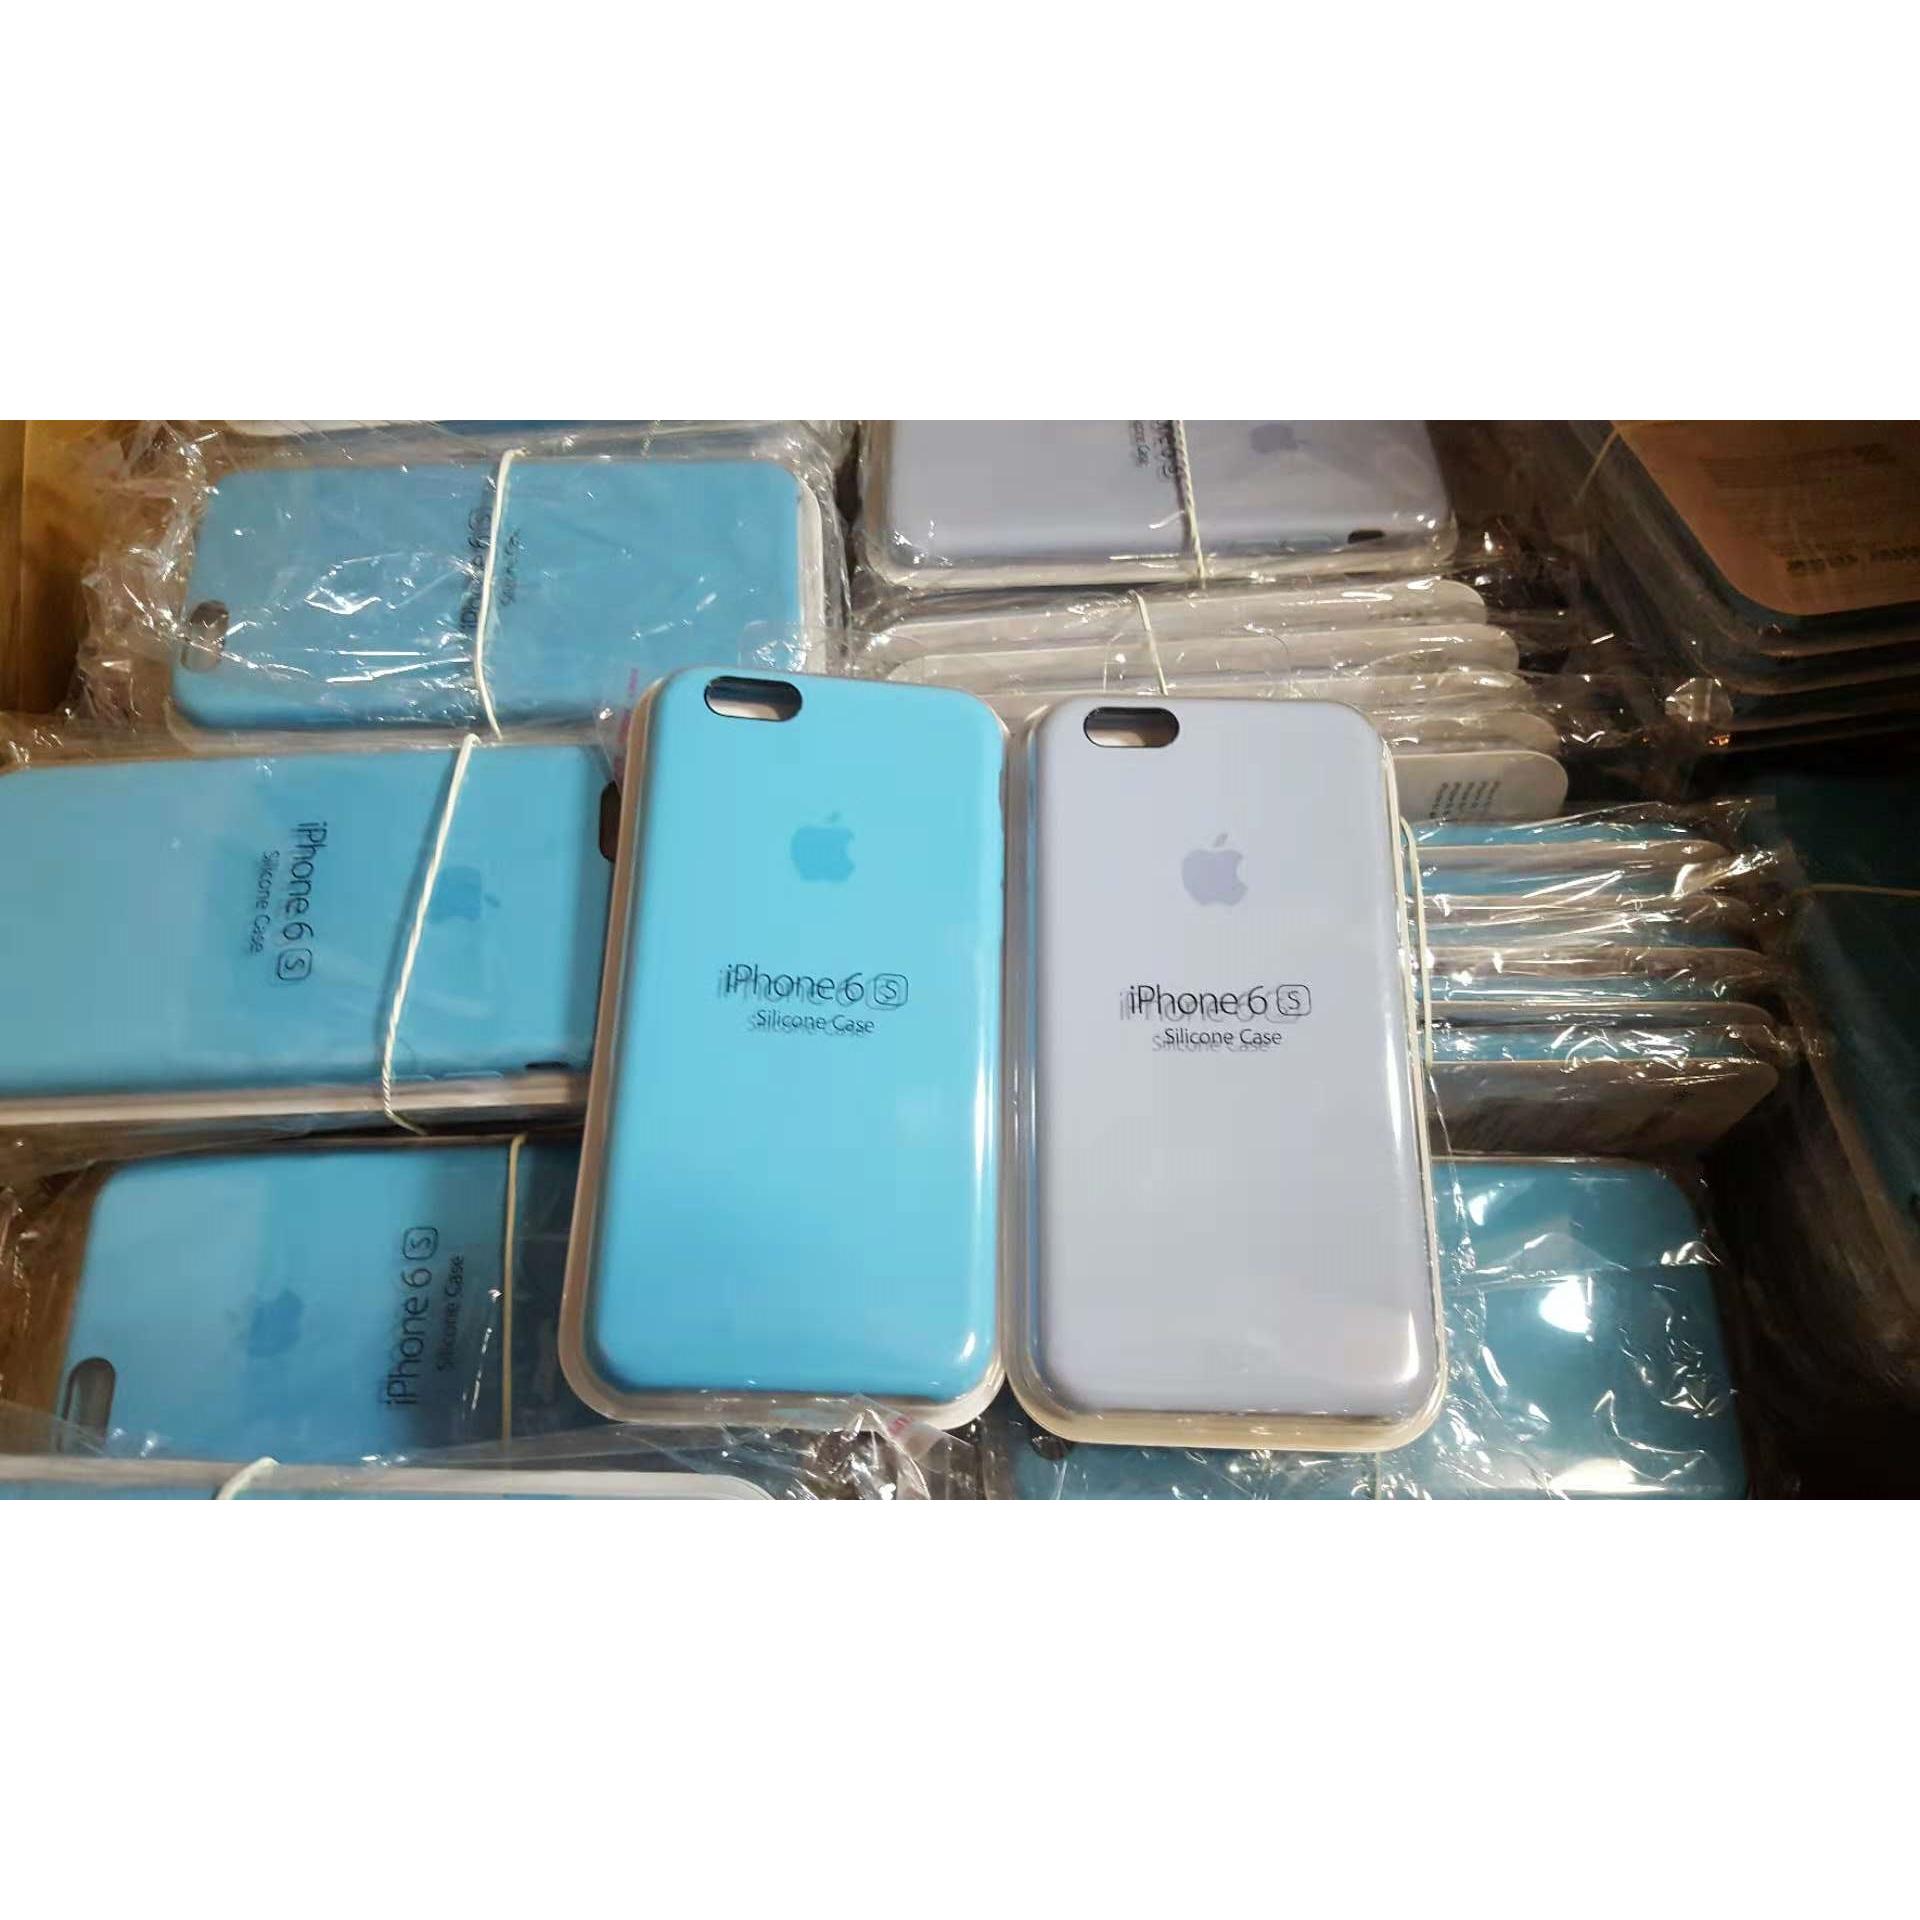 Apple iPhone6 and 6+ Original Silicone Cases Wholesale Suppliers